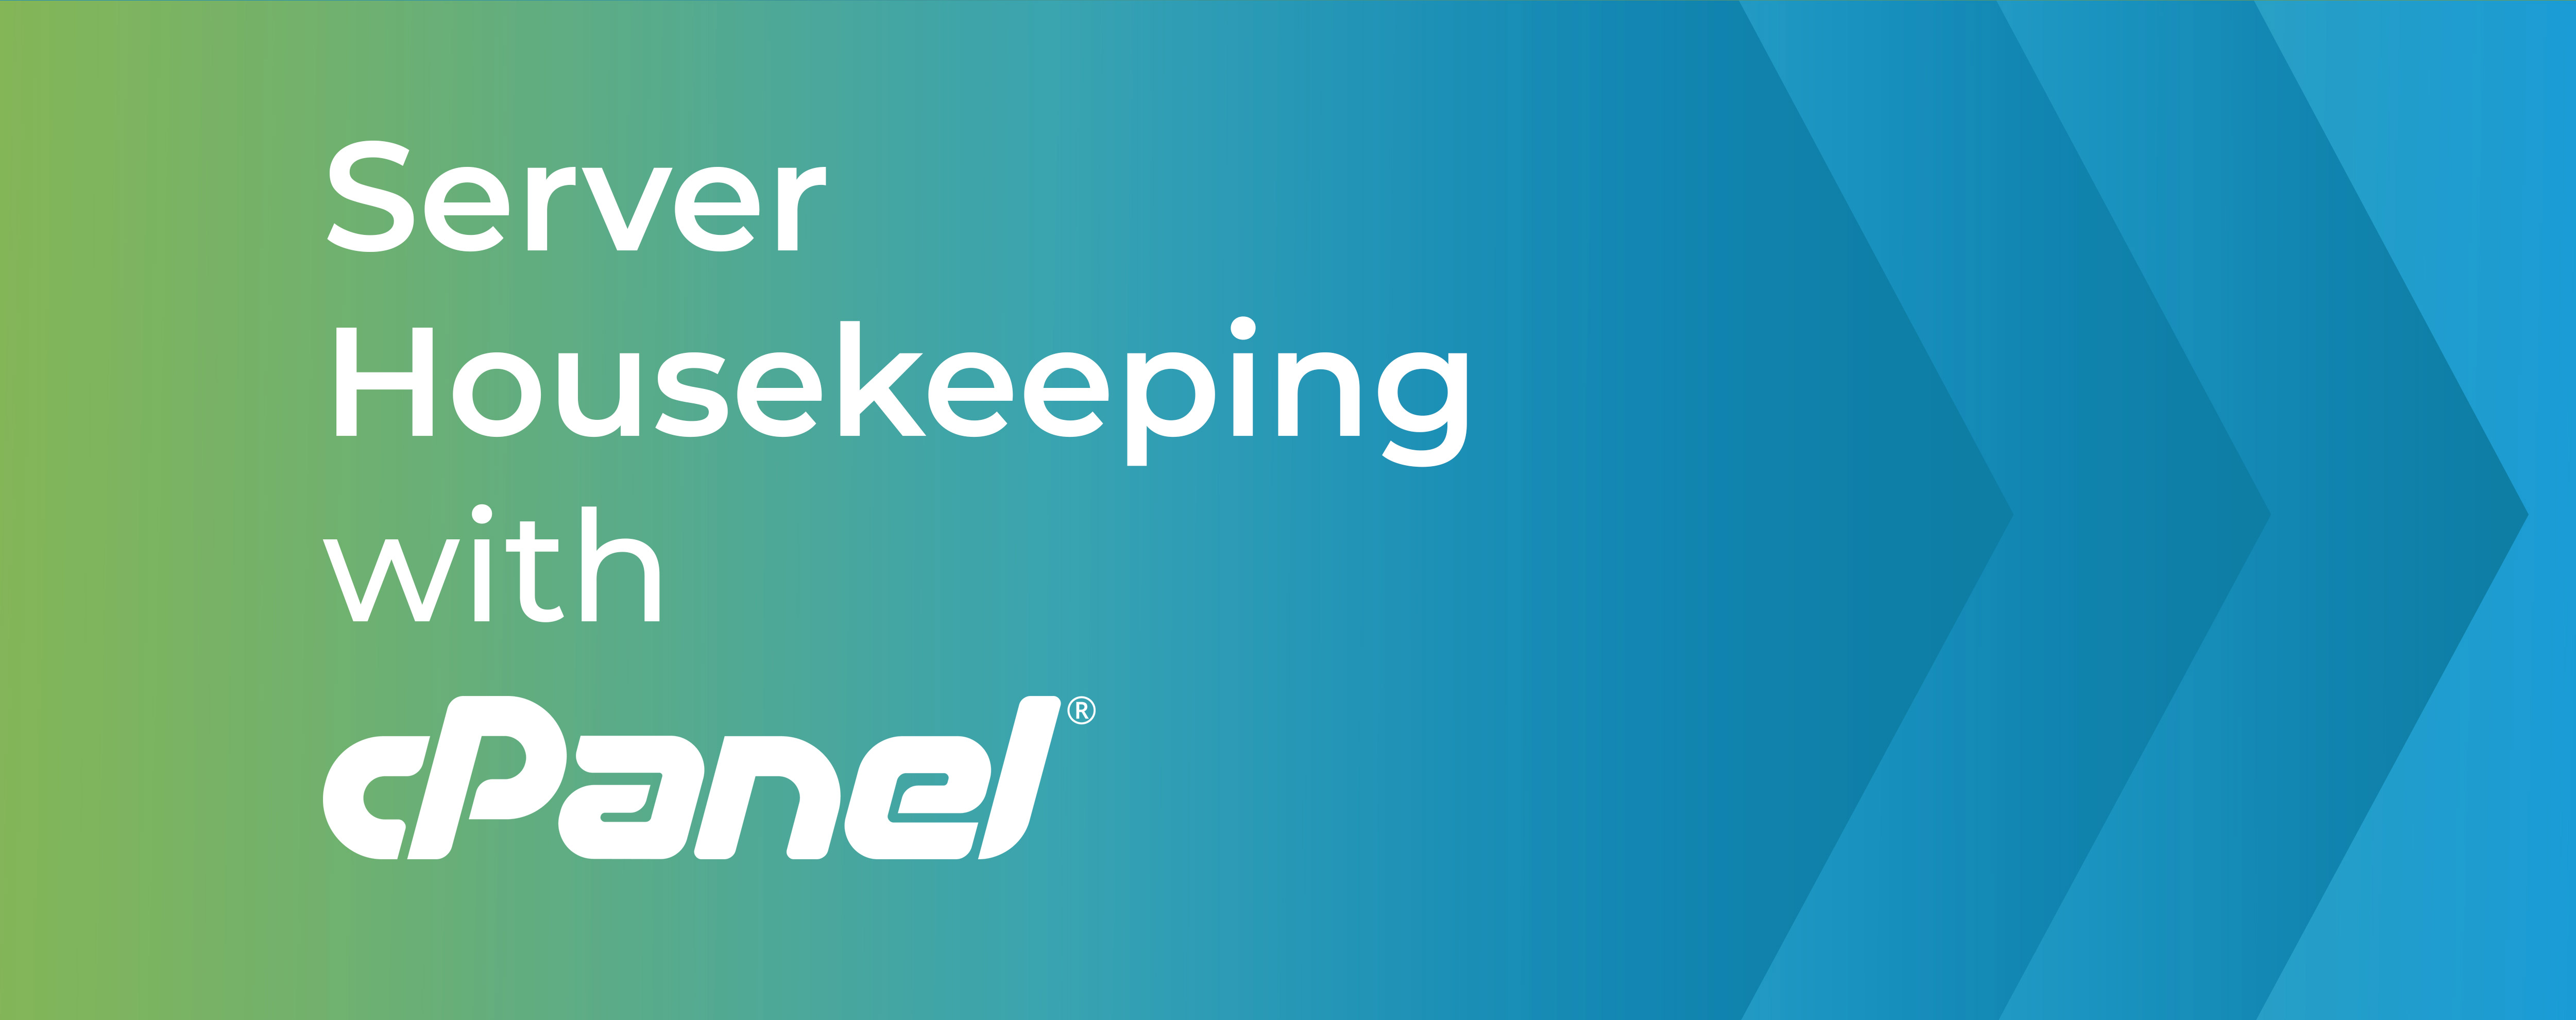 Server Housekeeping with cPanel